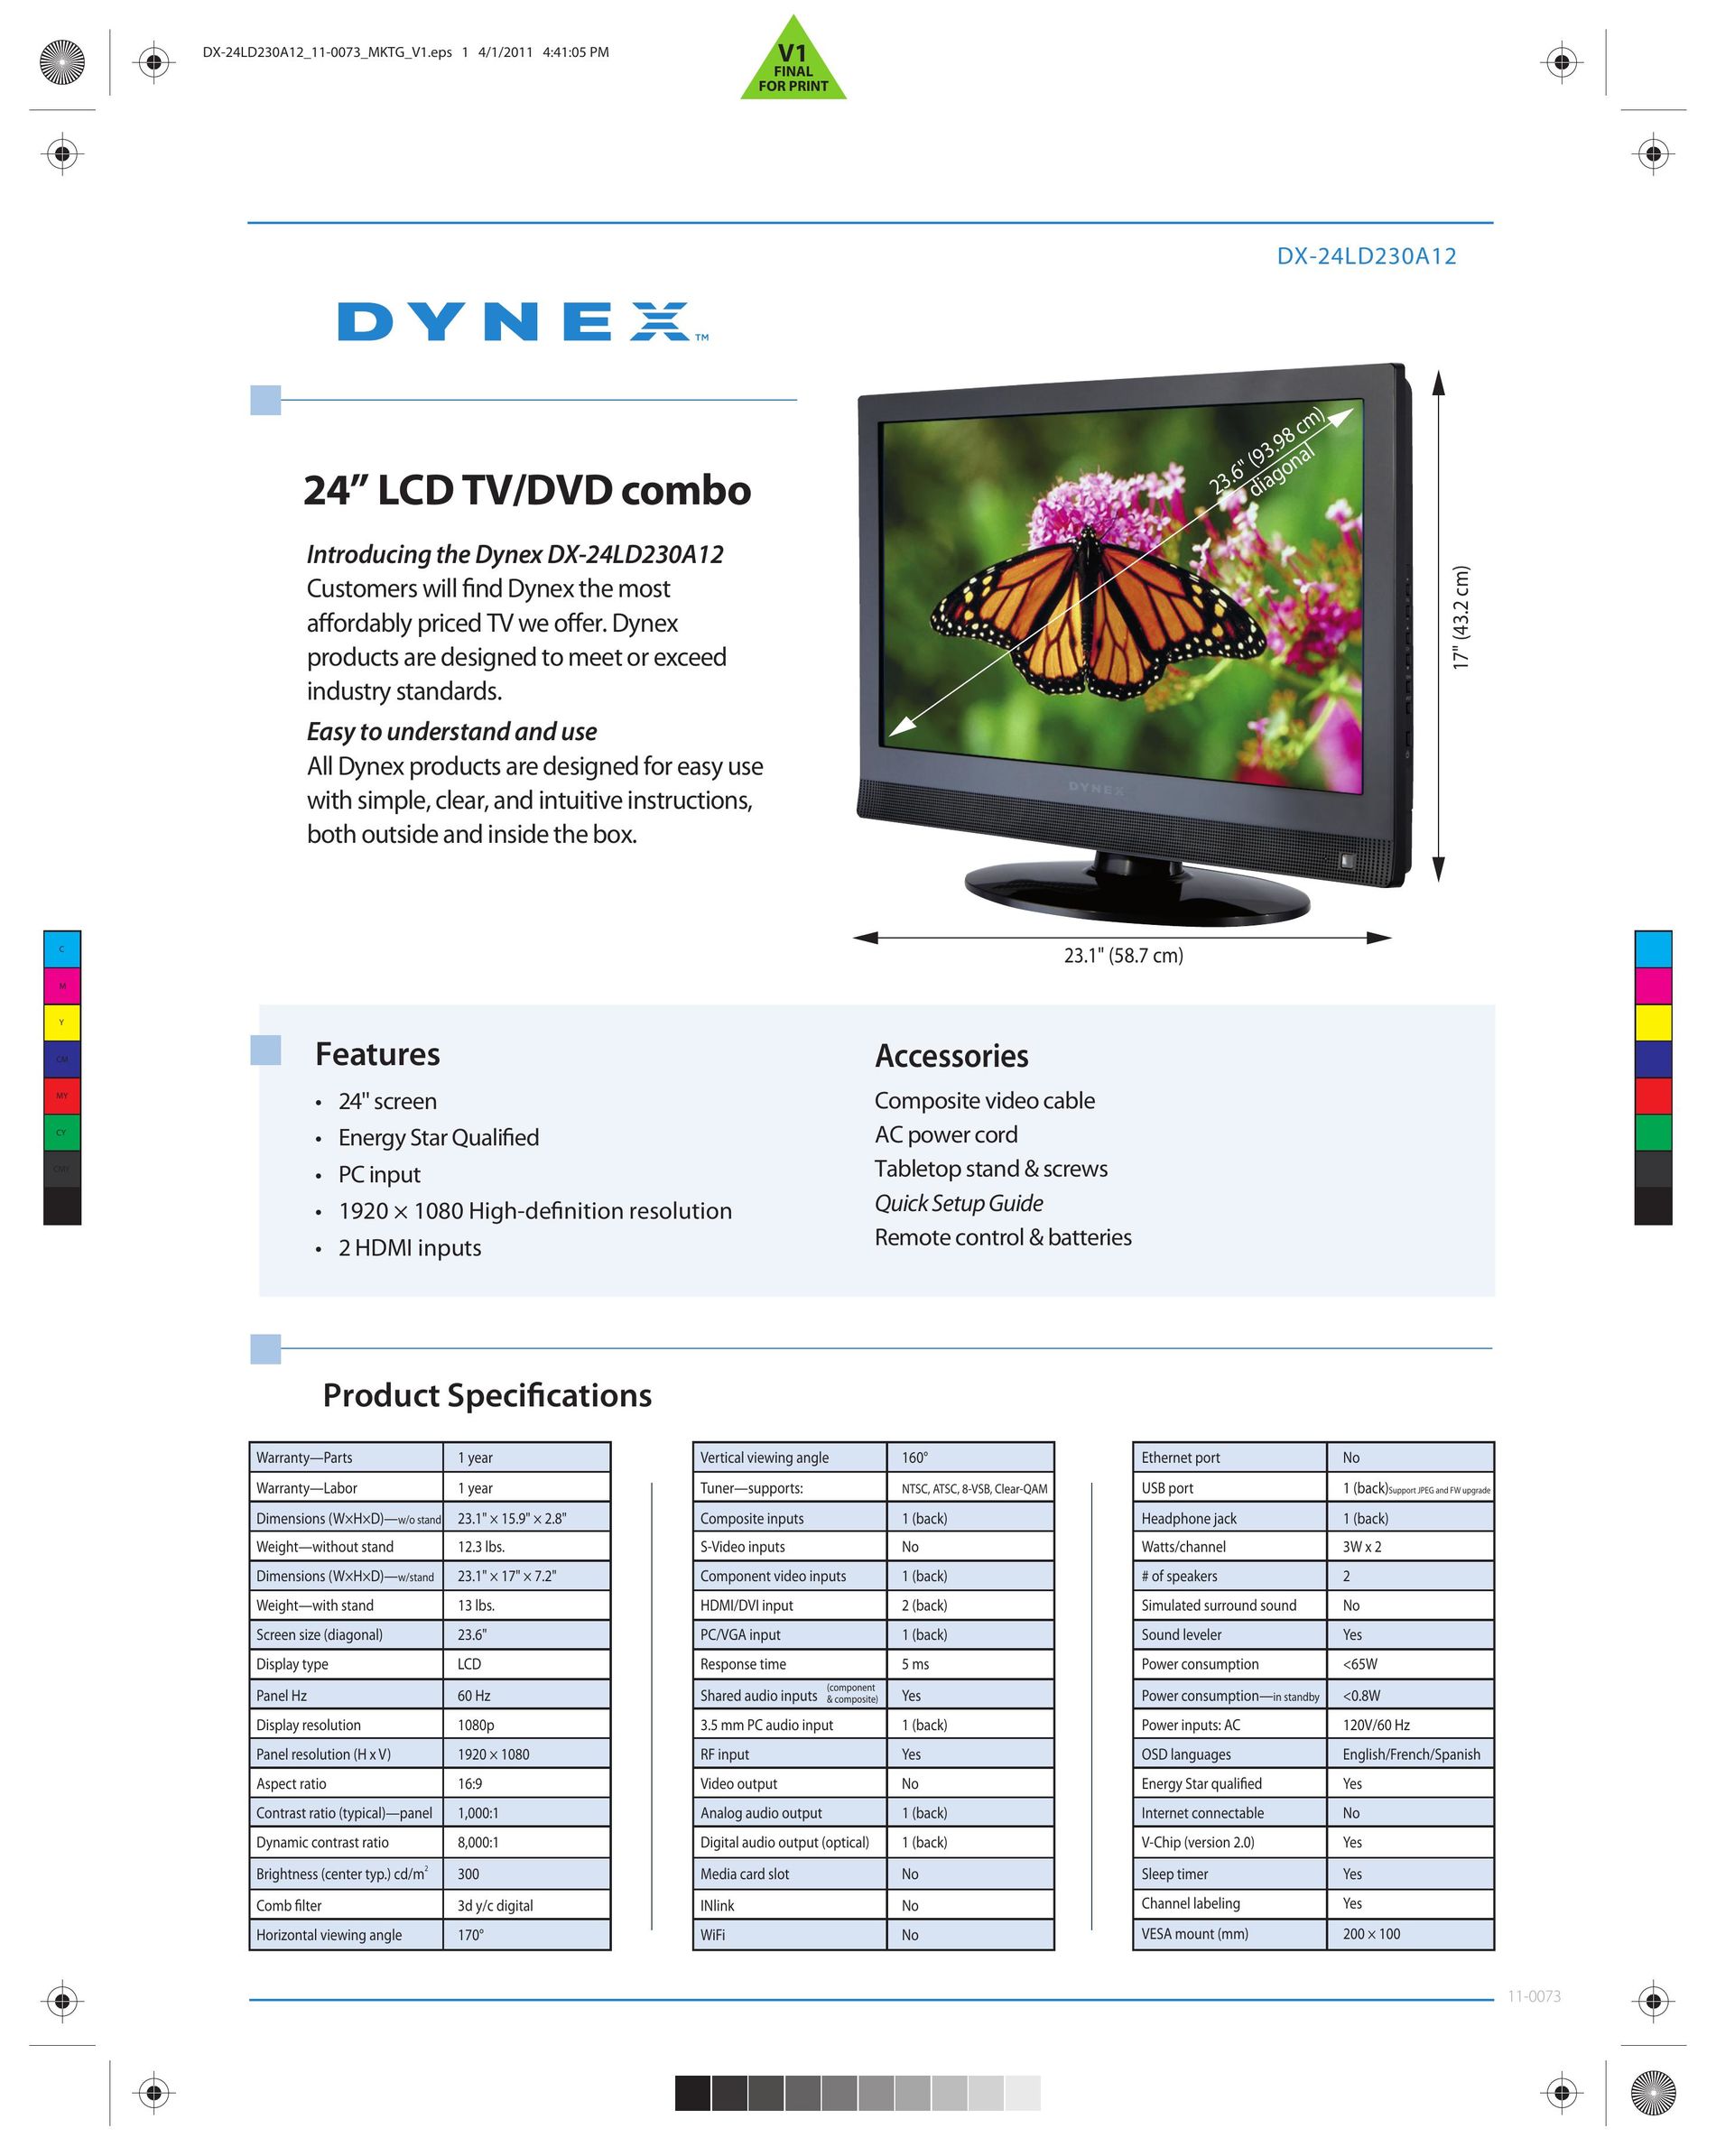 Dynex DX-24LD230A12 Flat Panel Television User Manual